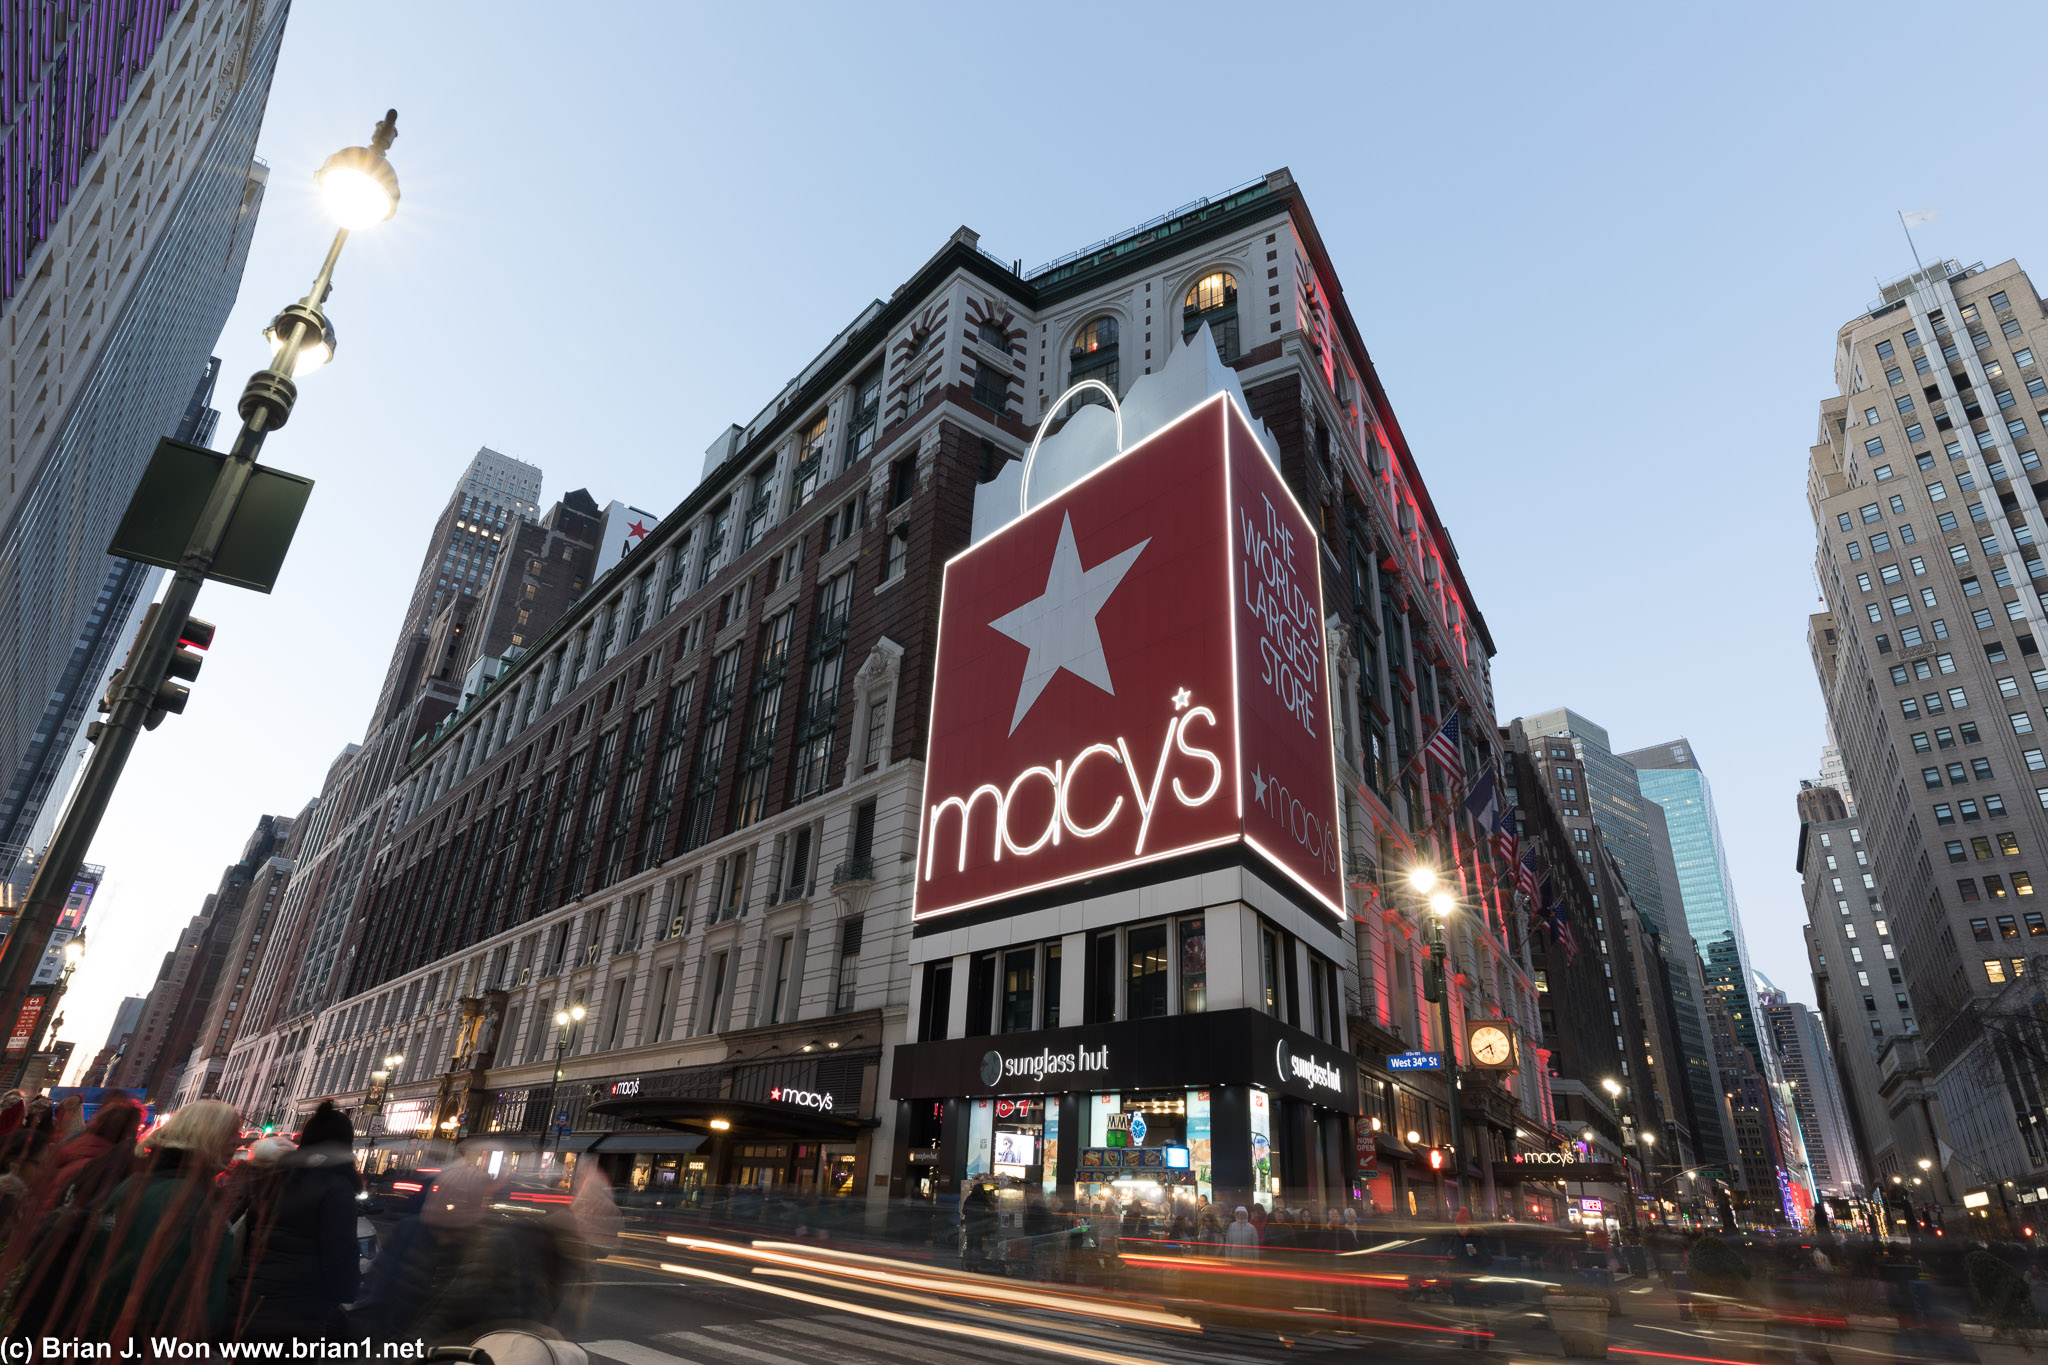 The world's largest Macy's.